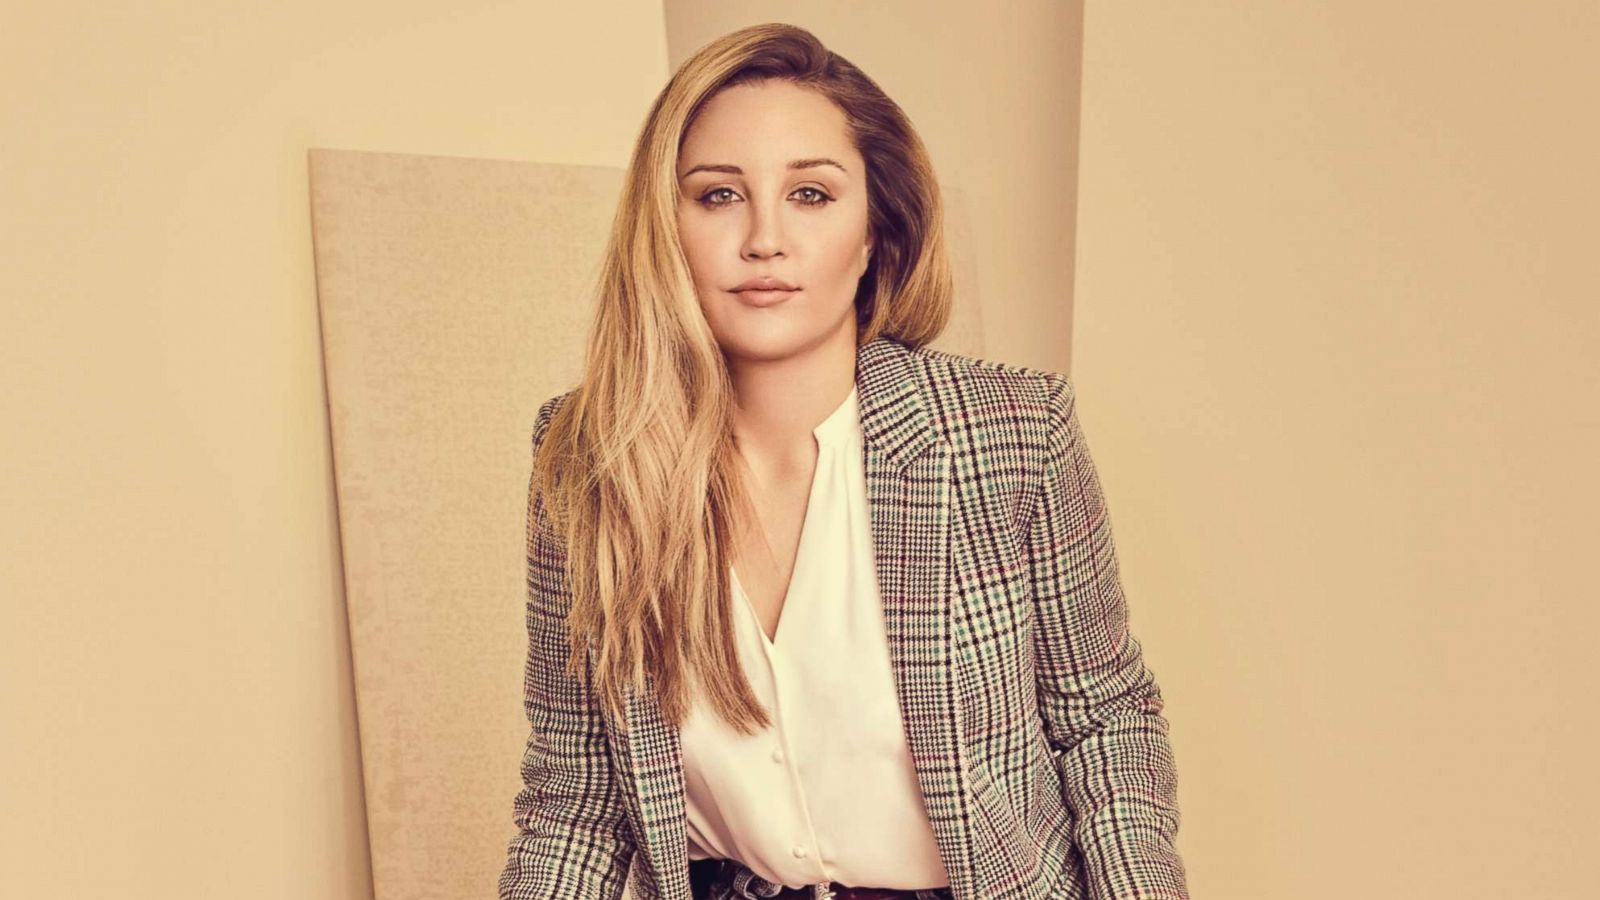 Amanda Bynes Smoking Meth - Amanda Bynes opens up about drug use, her very public breakdown and how she  got sober - Good Morning America